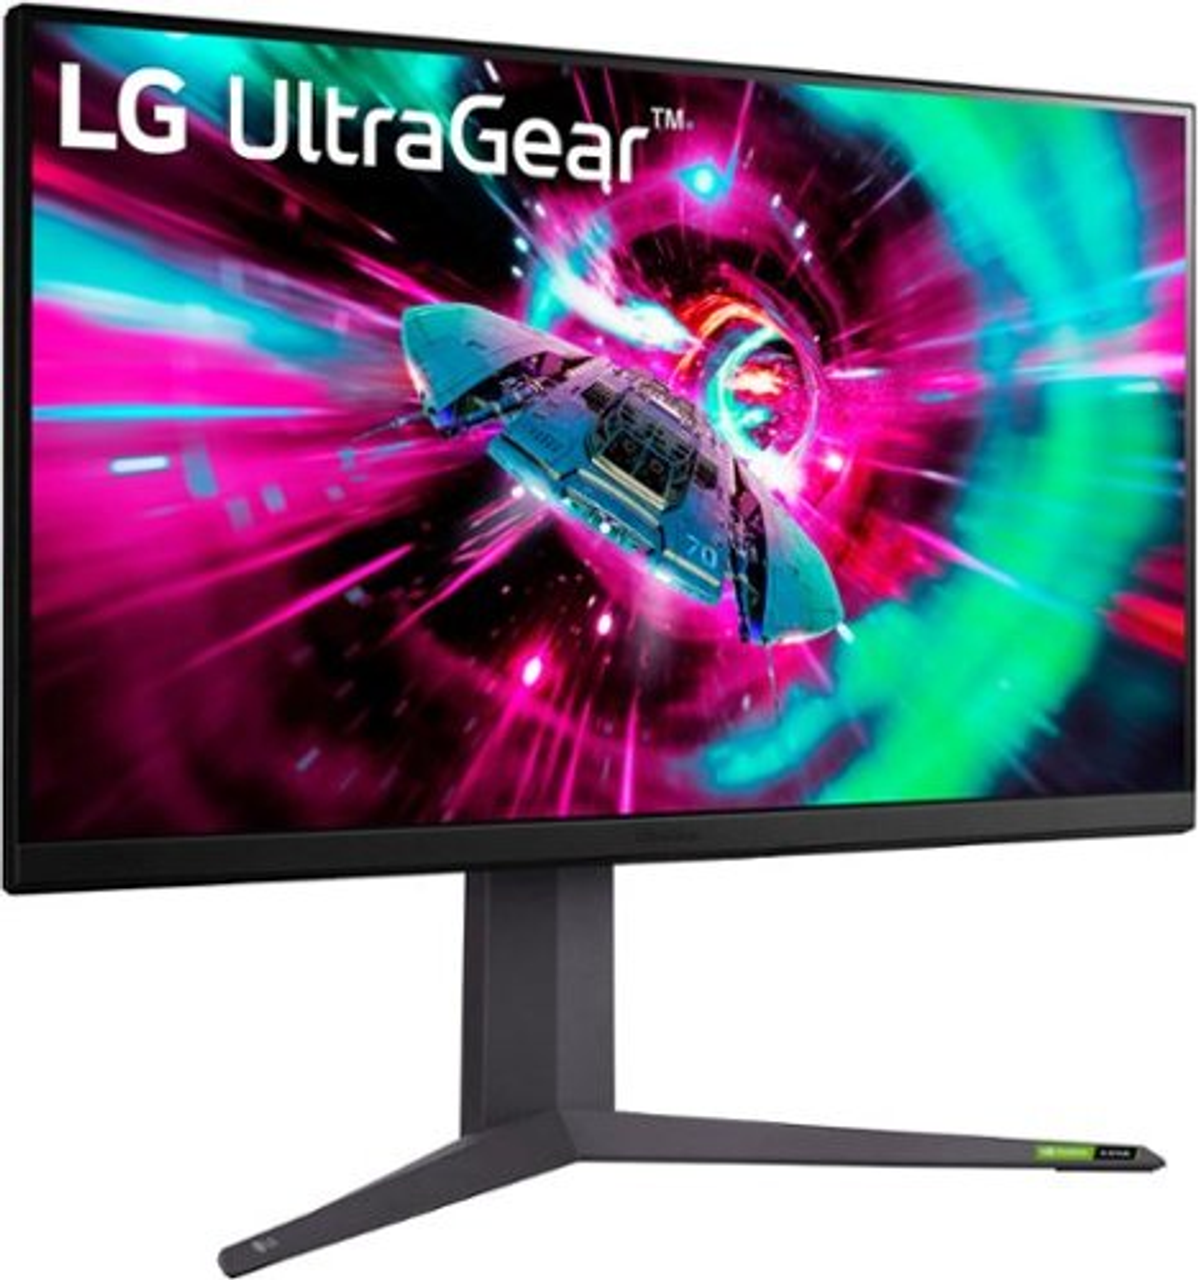 LG - UltraGear 32" IPS UHD FreeSync and G-SYNC Compatible Monitor with HDR (Display Port, HDMI) - Black